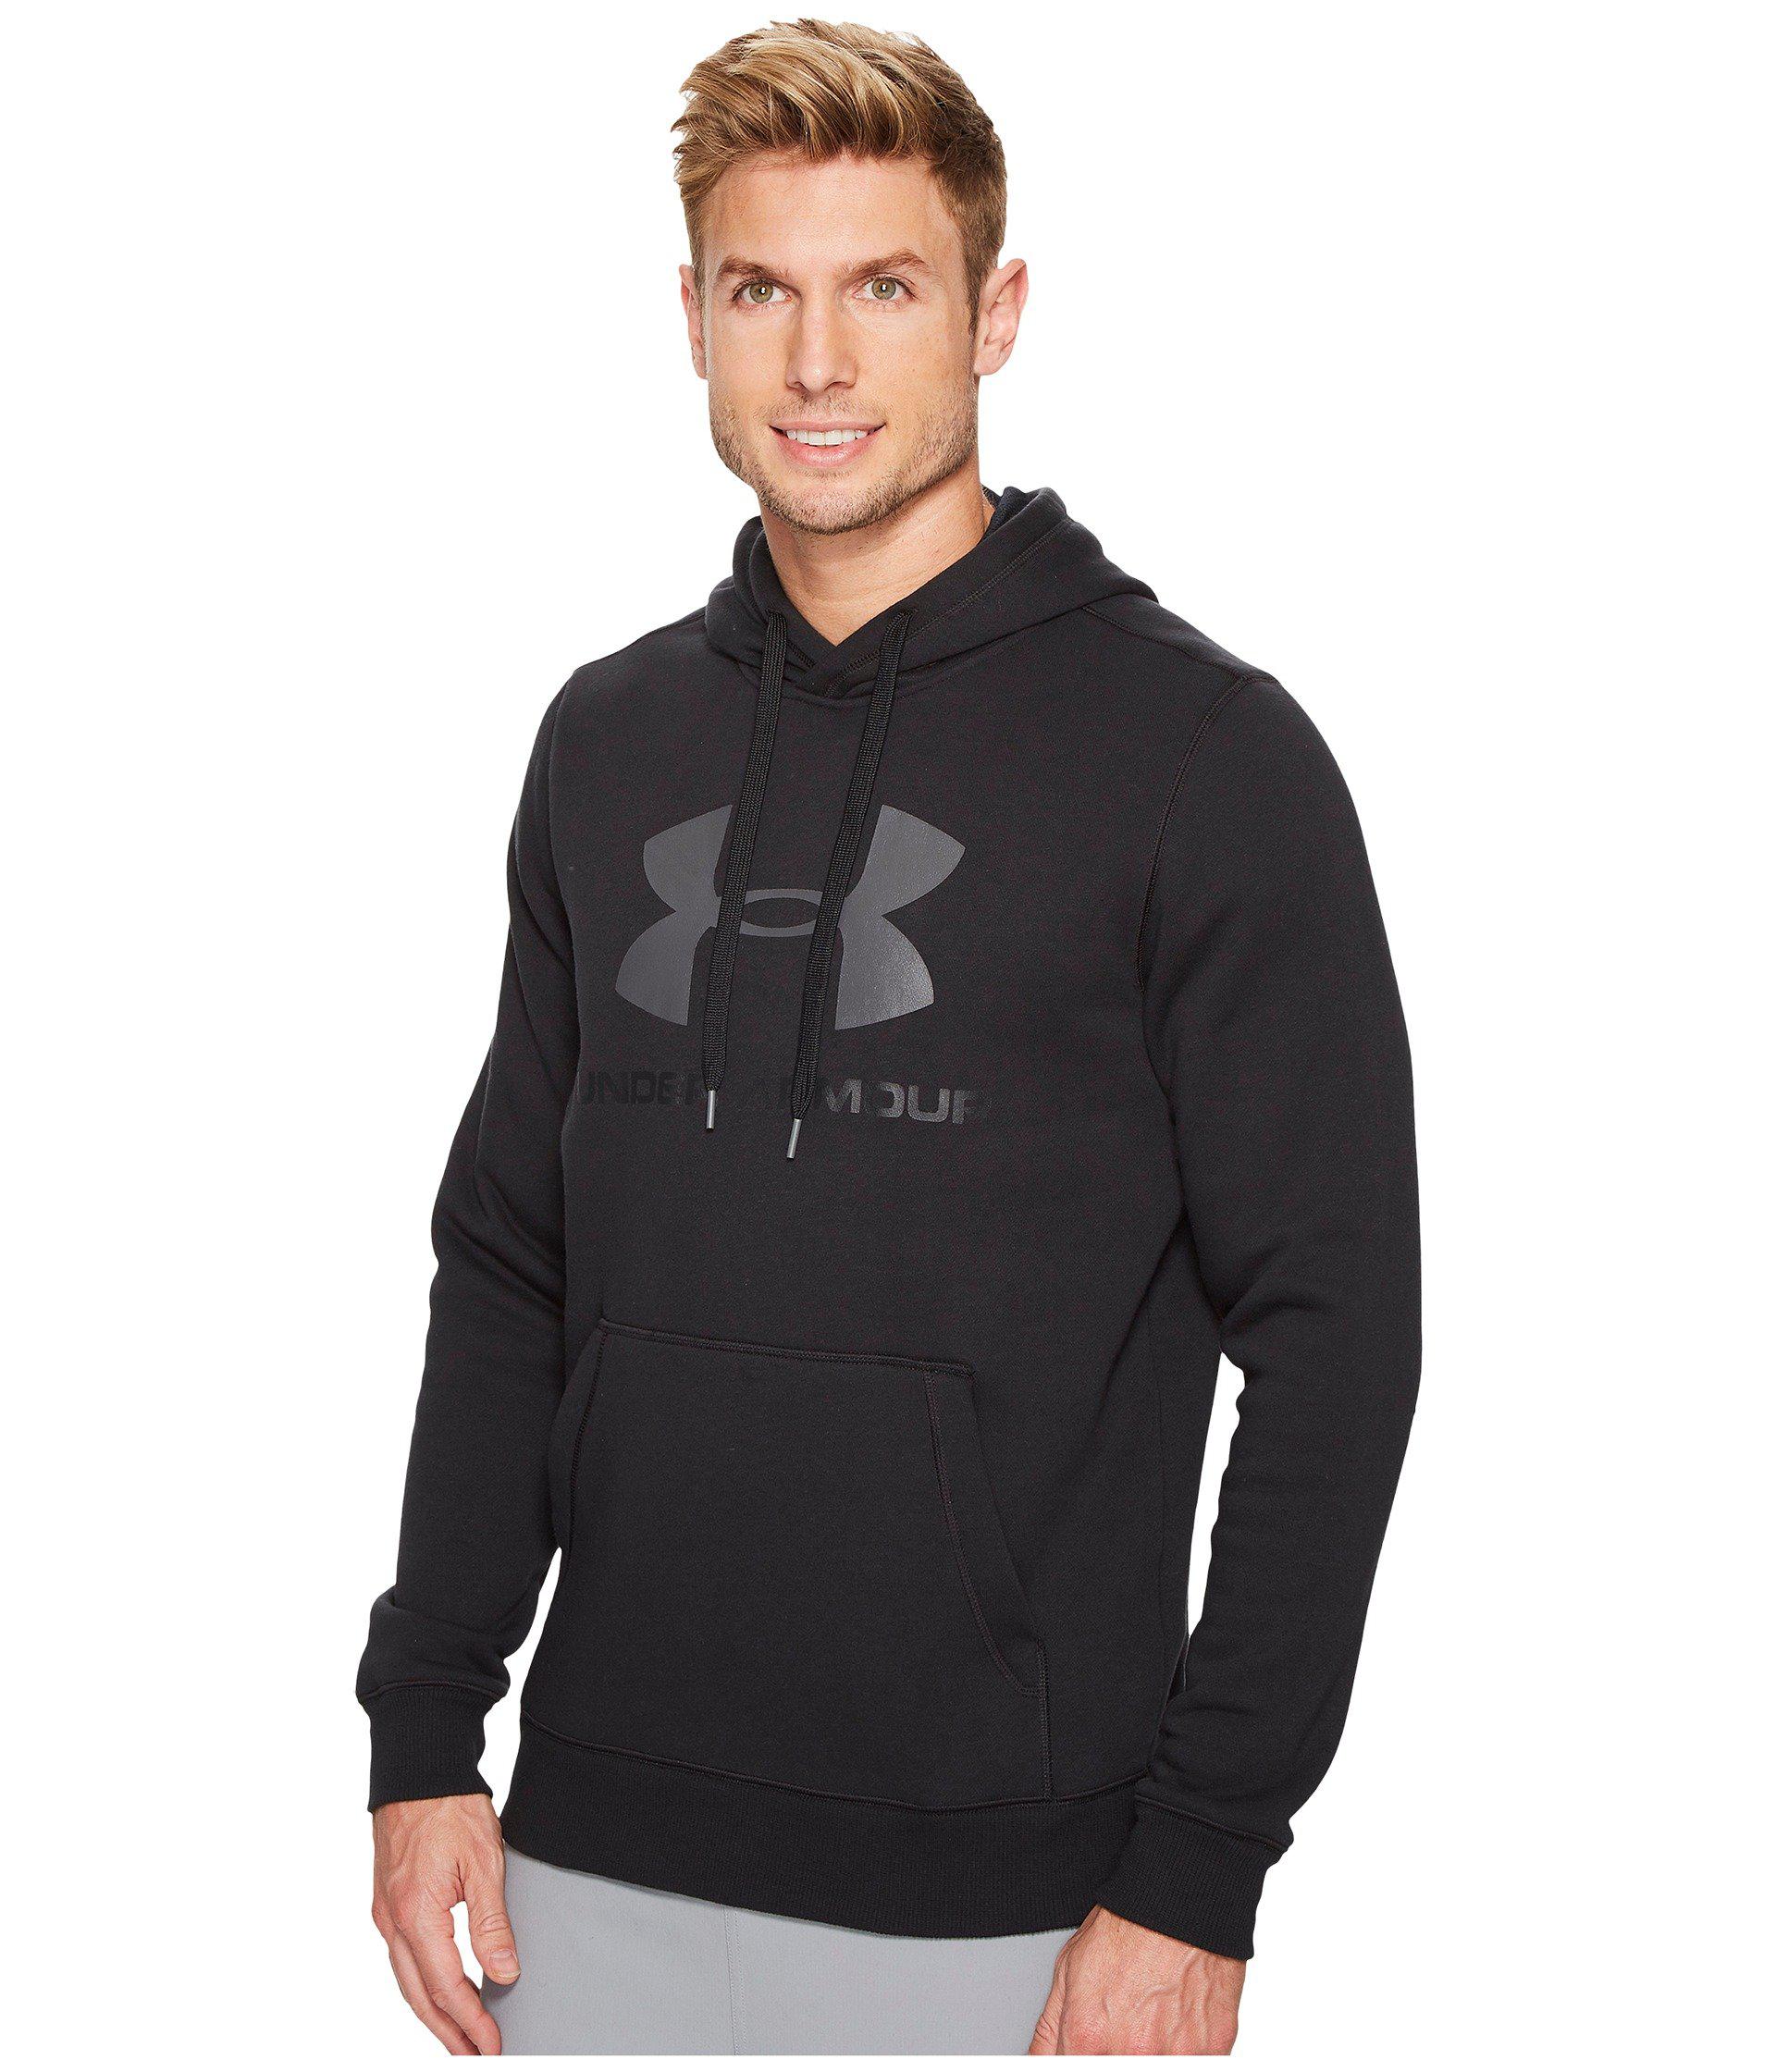 Under Armour Cotton Rival Fitted Graphic Hoodie in Black for Men - Lyst